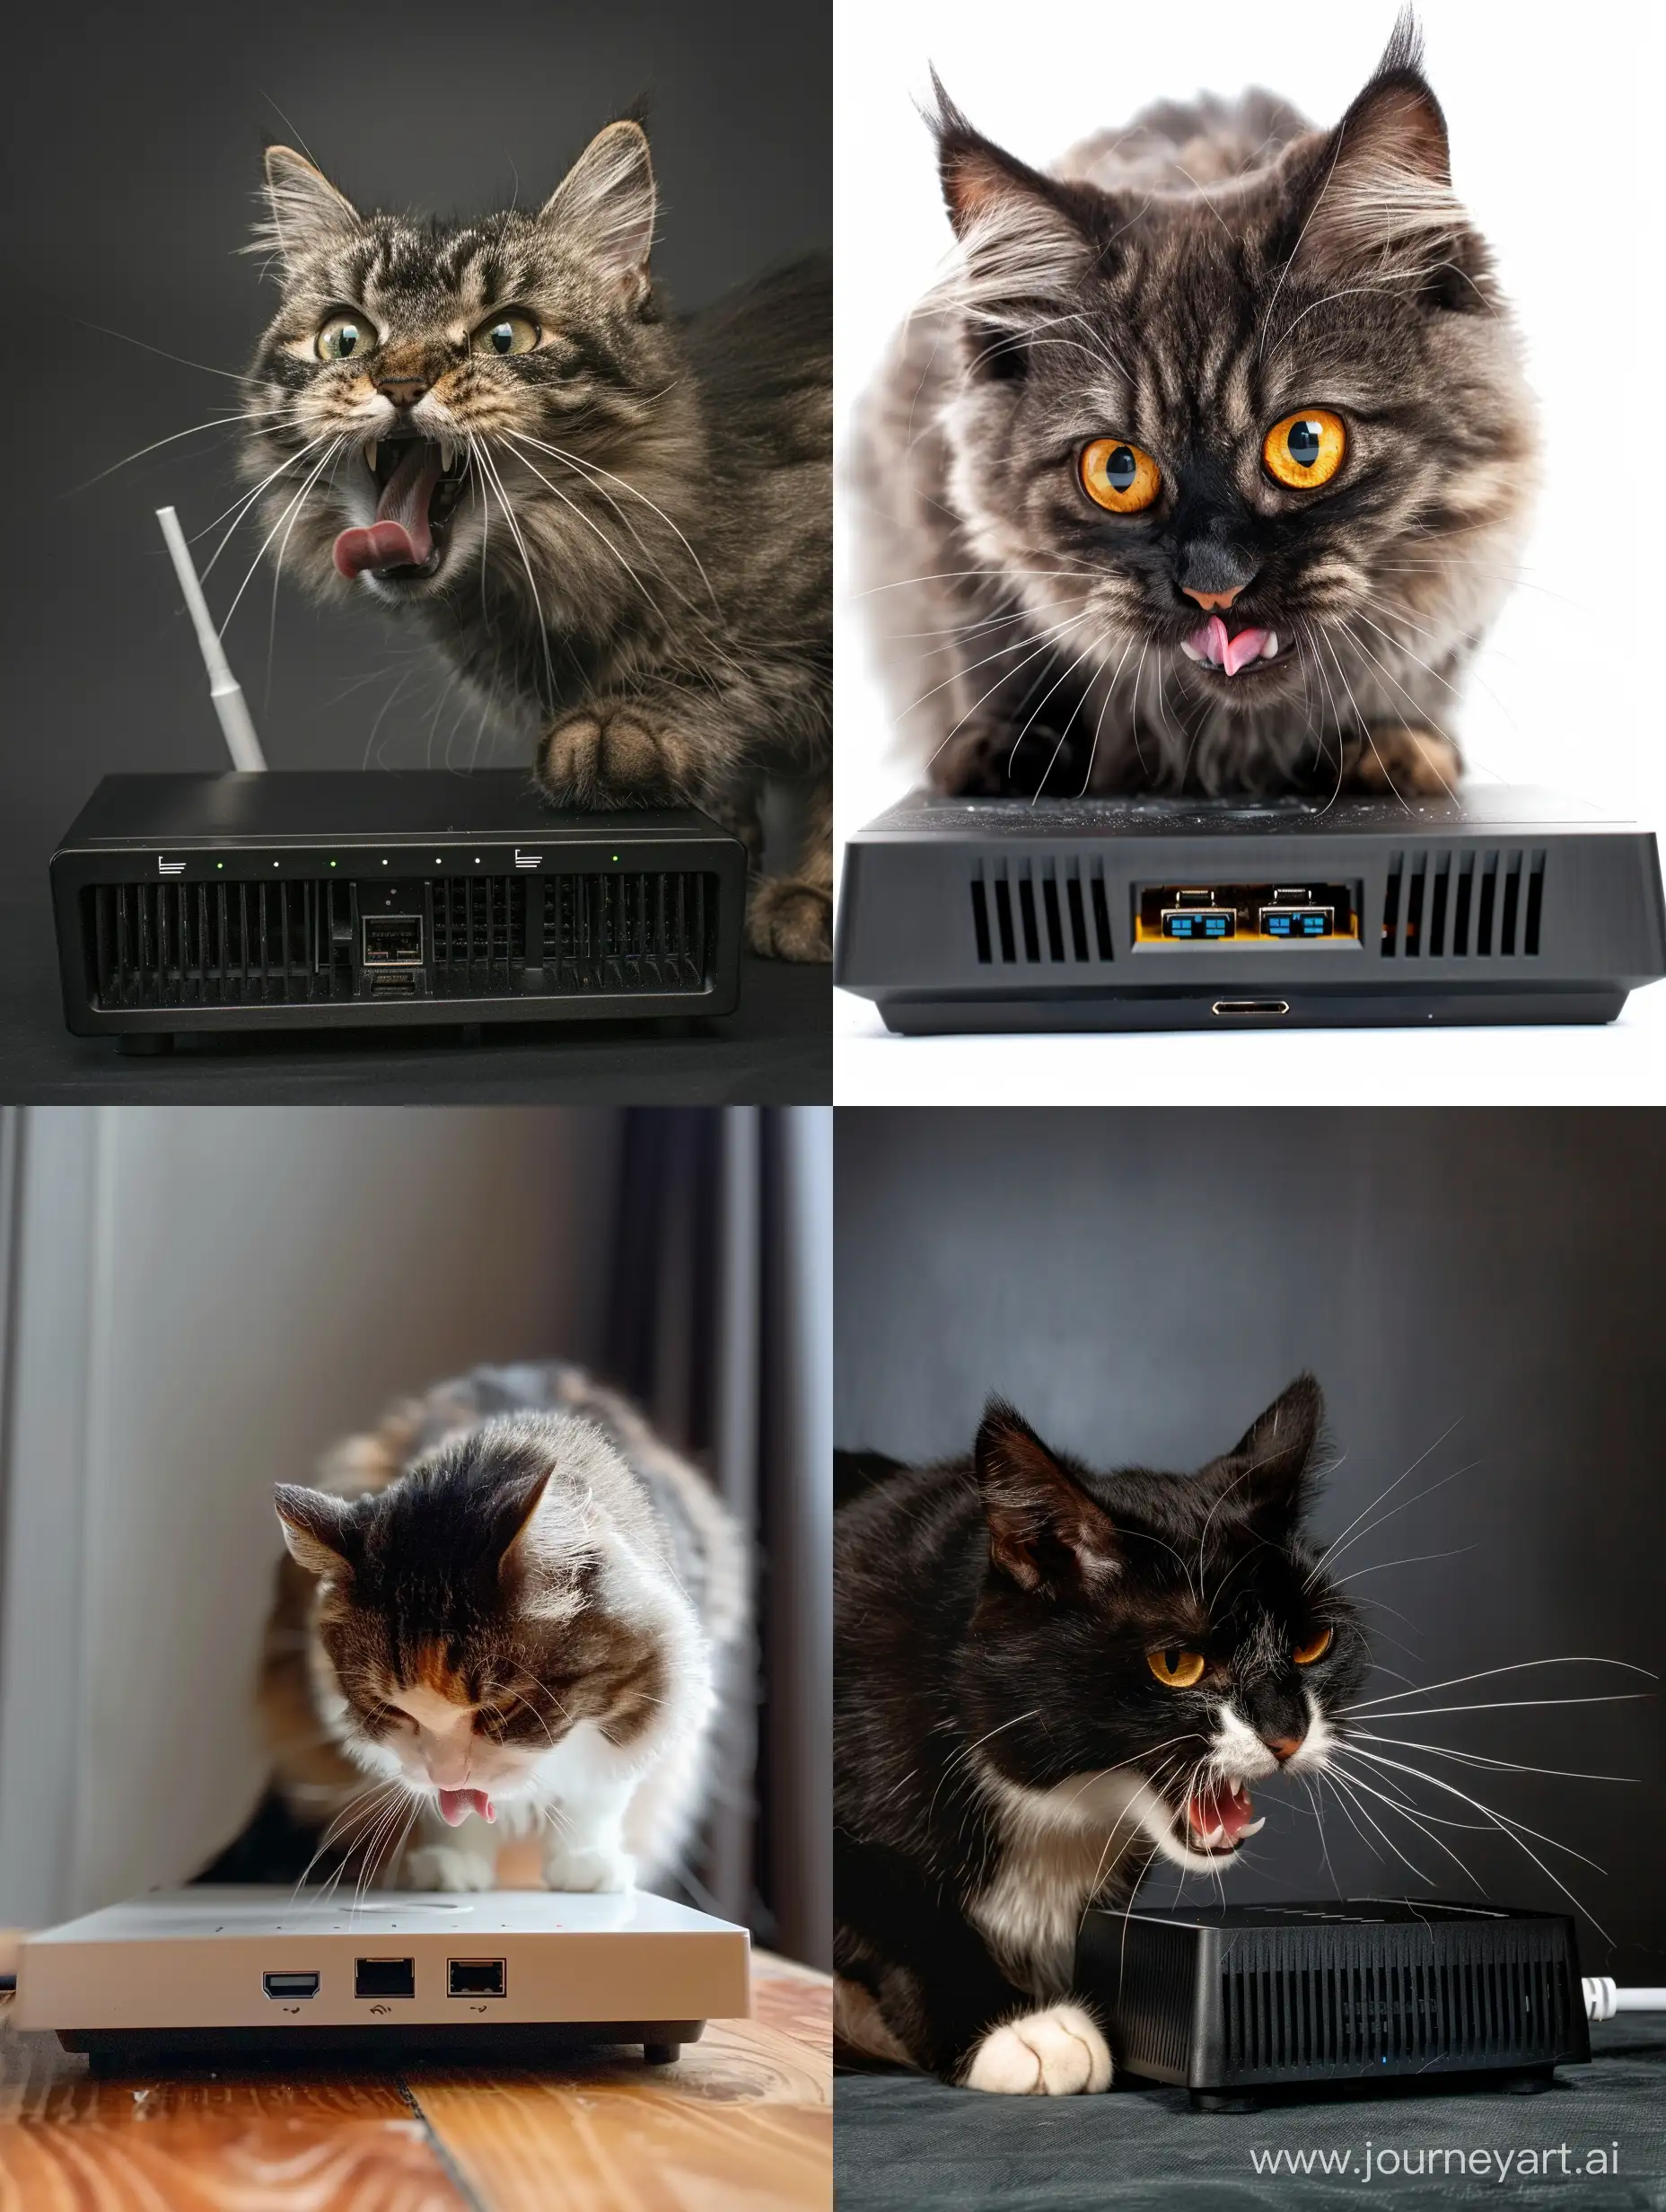 Chubby-Cat-Playfully-Interacts-with-5G-Router